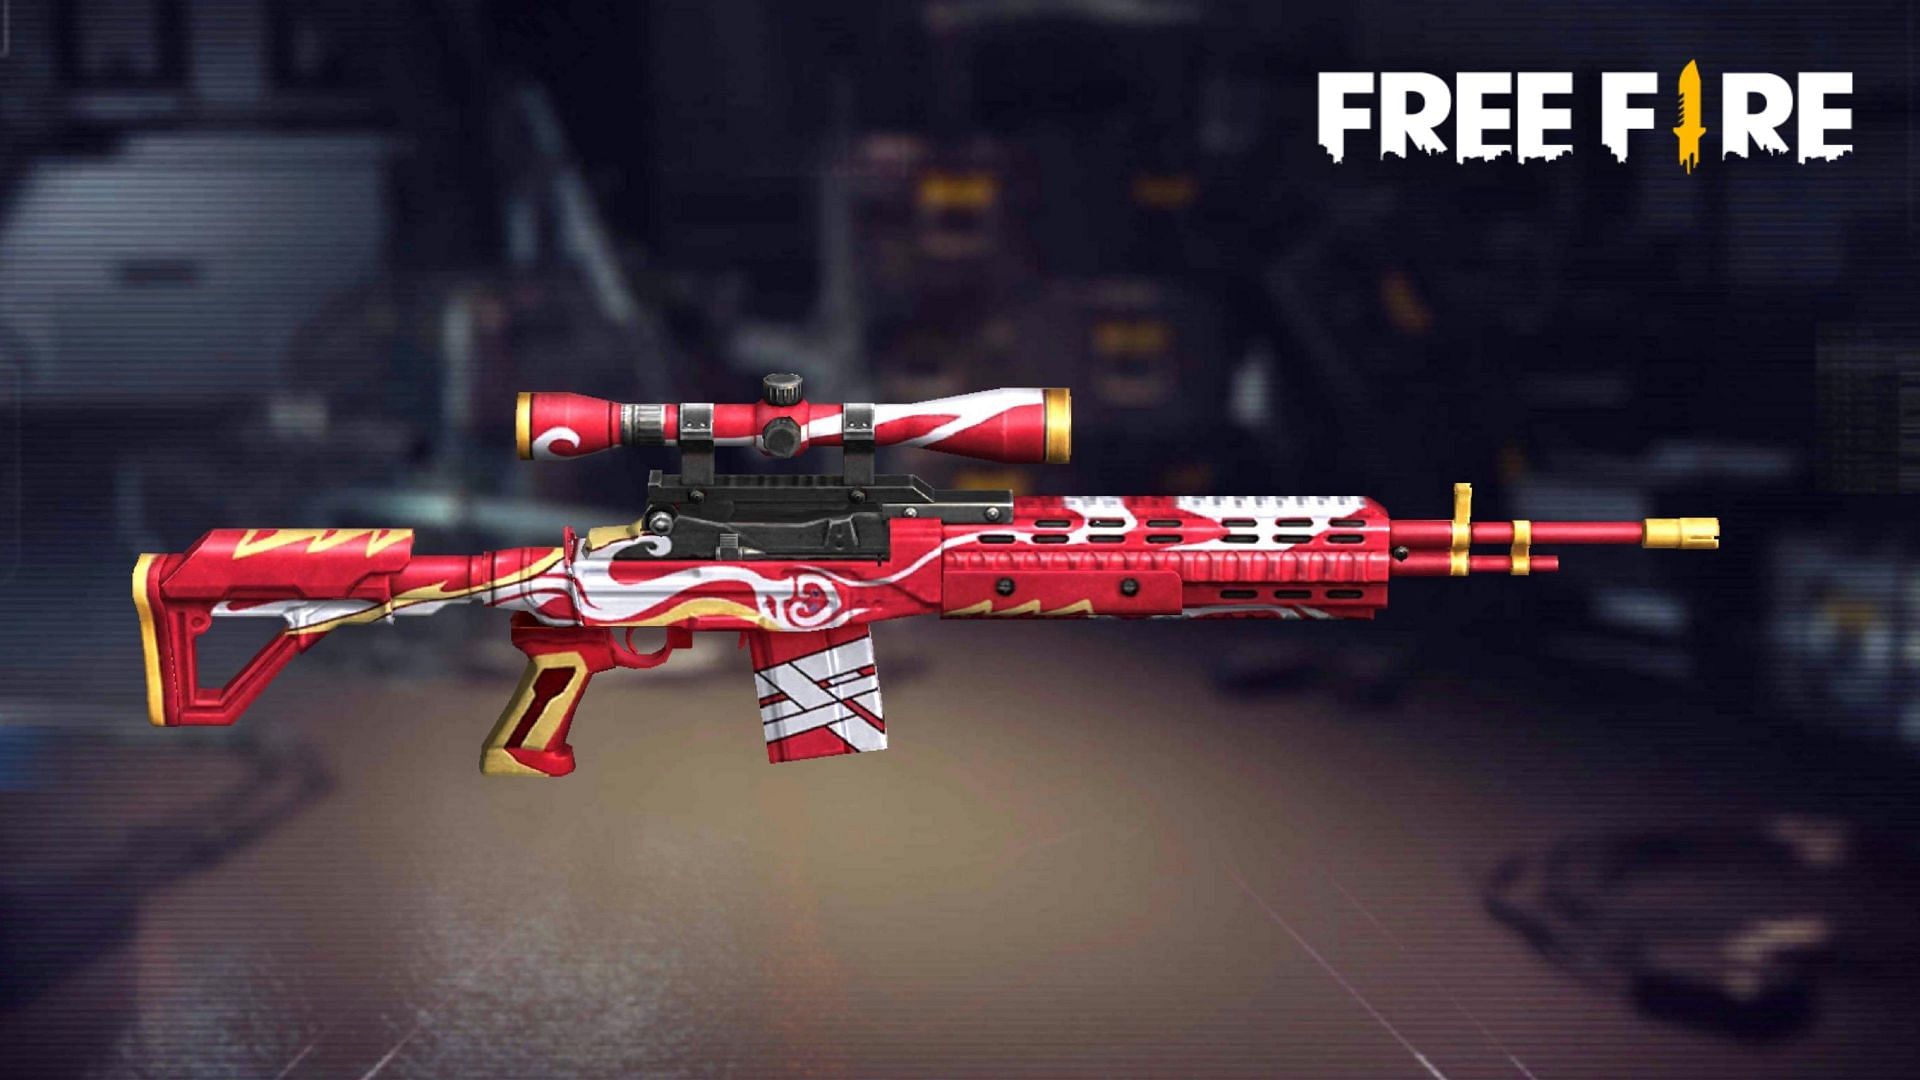 This skin is available for free in one of the upcoming events (Image via Free Fire)